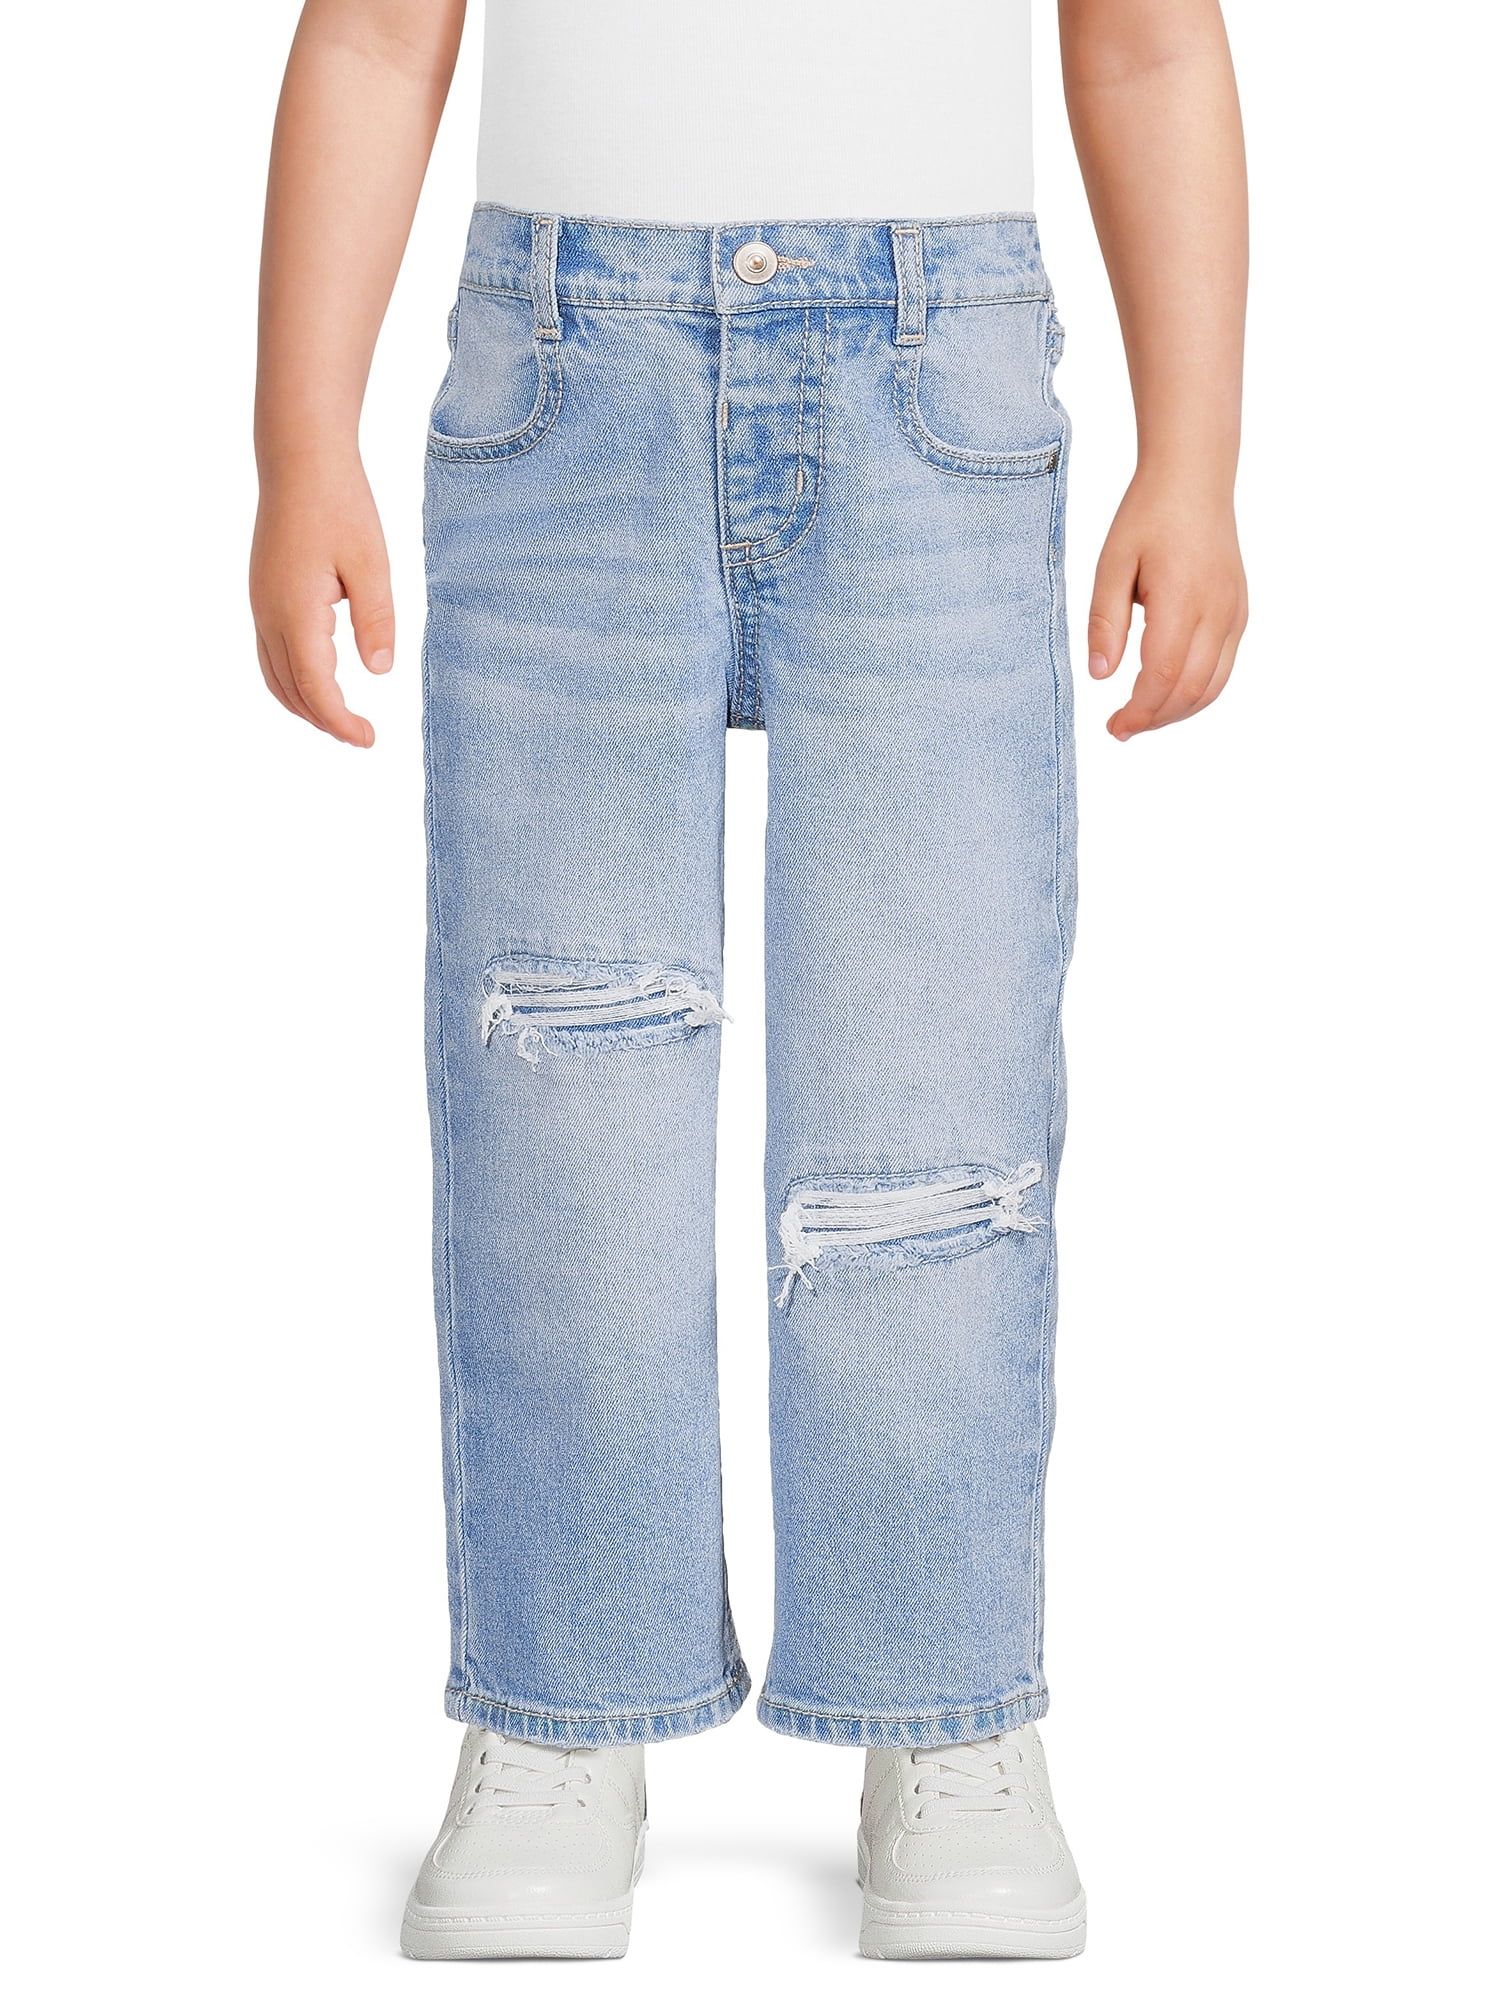 Wonder Nation Baby and Toddler Girls Jeans, Sizes 12M - 5T | Walmart (US)